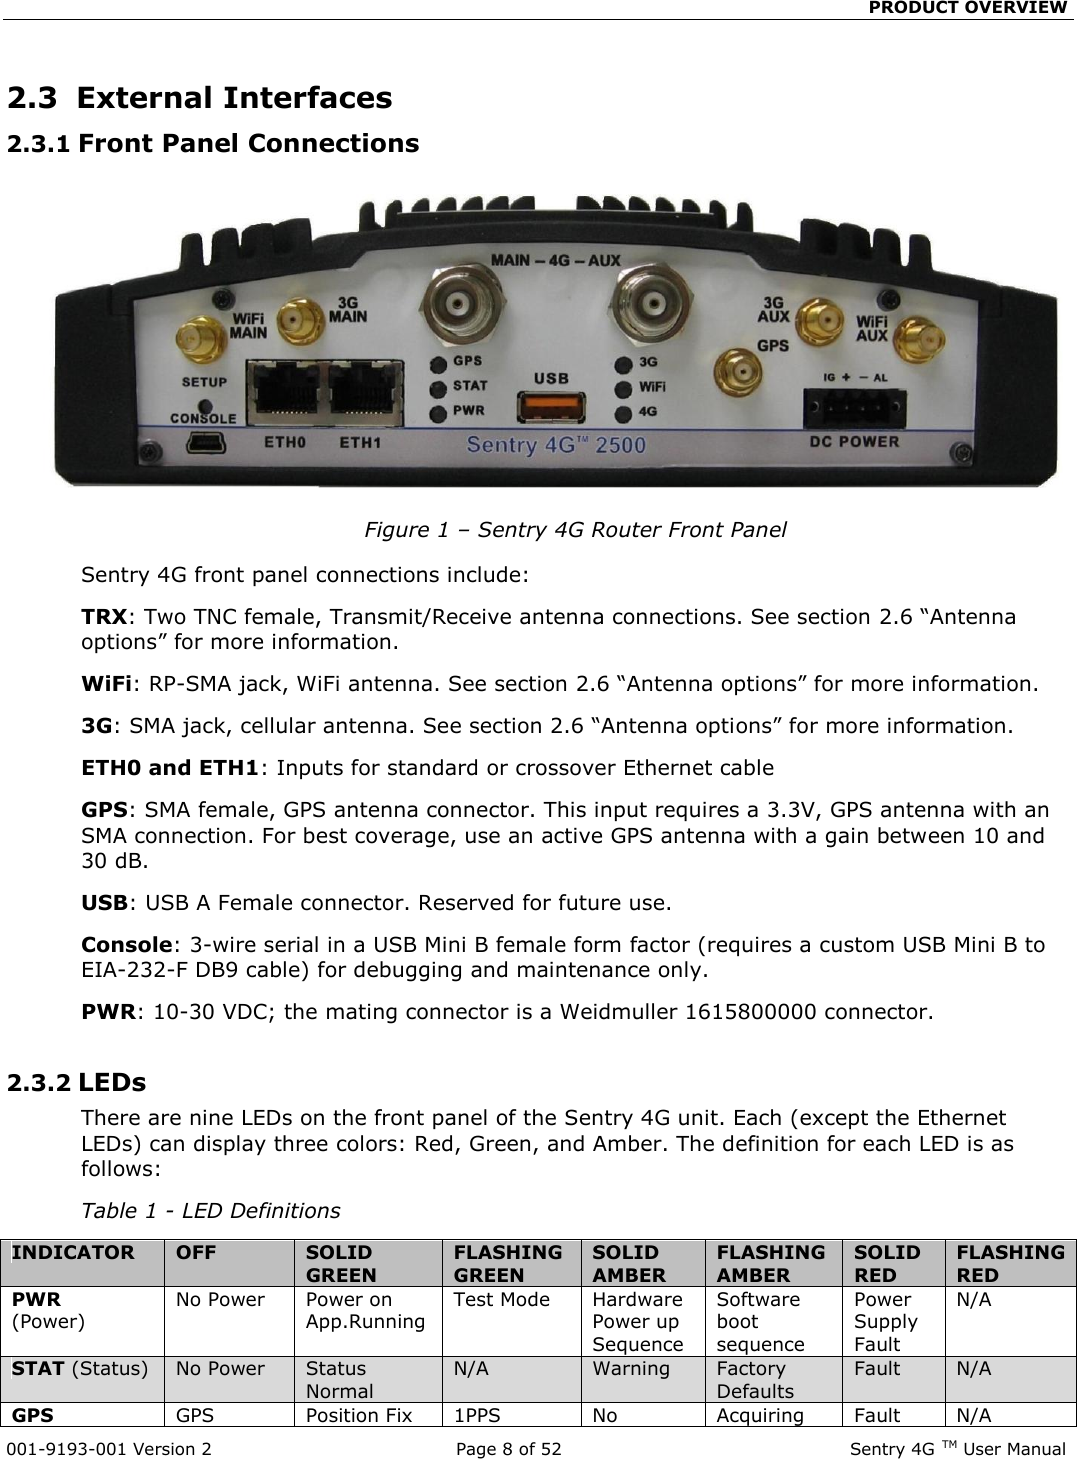                                                 PRODUCT OVERVIEW  001-9193-001 Version 2              Page 8 of 52                             Sentry 4G TM User Manual  2.3  External Interfaces 2.3.1 Front Panel Connections    Figure 1 – Sentry 4G Router Front Panel  Sentry 4G front panel connections include: TRX: Two TNC female, Transmit/Receive antenna connections. See section 2.6 “Antenna options” for more information.   WiFi: RP-SMA jack, WiFi antenna. See section 2.6 “Antenna options” for more information. 3G: SMA jack, cellular antenna. See section 2.6 “Antenna options” for more information. ETH0 and ETH1: Inputs for standard or crossover Ethernet cable  GPS: SMA female, GPS antenna connector. This input requires a 3.3V, GPS antenna with an SMA connection. For best coverage, use an active GPS antenna with a gain between 10 and 30 dB.   USB: USB A Female connector. Reserved for future use. Console: 3-wire serial in a USB Mini B female form factor (requires a custom USB Mini B to EIA-232-F DB9 cable) for debugging and maintenance only.  PWR: 10-30 VDC; the mating connector is a Weidmuller 1615800000 connector.  2.3.2 LEDs There are nine LEDs on the front panel of the Sentry 4G unit. Each (except the Ethernet LEDs) can display three colors: Red, Green, and Amber. The definition for each LED is as follows: Table 1 - LED Definitions INDICATOR OFF SOLID GREEN FLASHING GREEN SOLID AMBER FLASHING AMBER SOLID RED FLASHING RED PWR (Power) No Power  Power on App.Running Test Mode Hardware Power up Sequence Software boot sequence Power Supply Fault N/A STAT (Status) No Power Status Normal N/A Warning Factory Defaults Fault N/A GPS GPS Position Fix 1PPS No Acquiring Fault N/A 